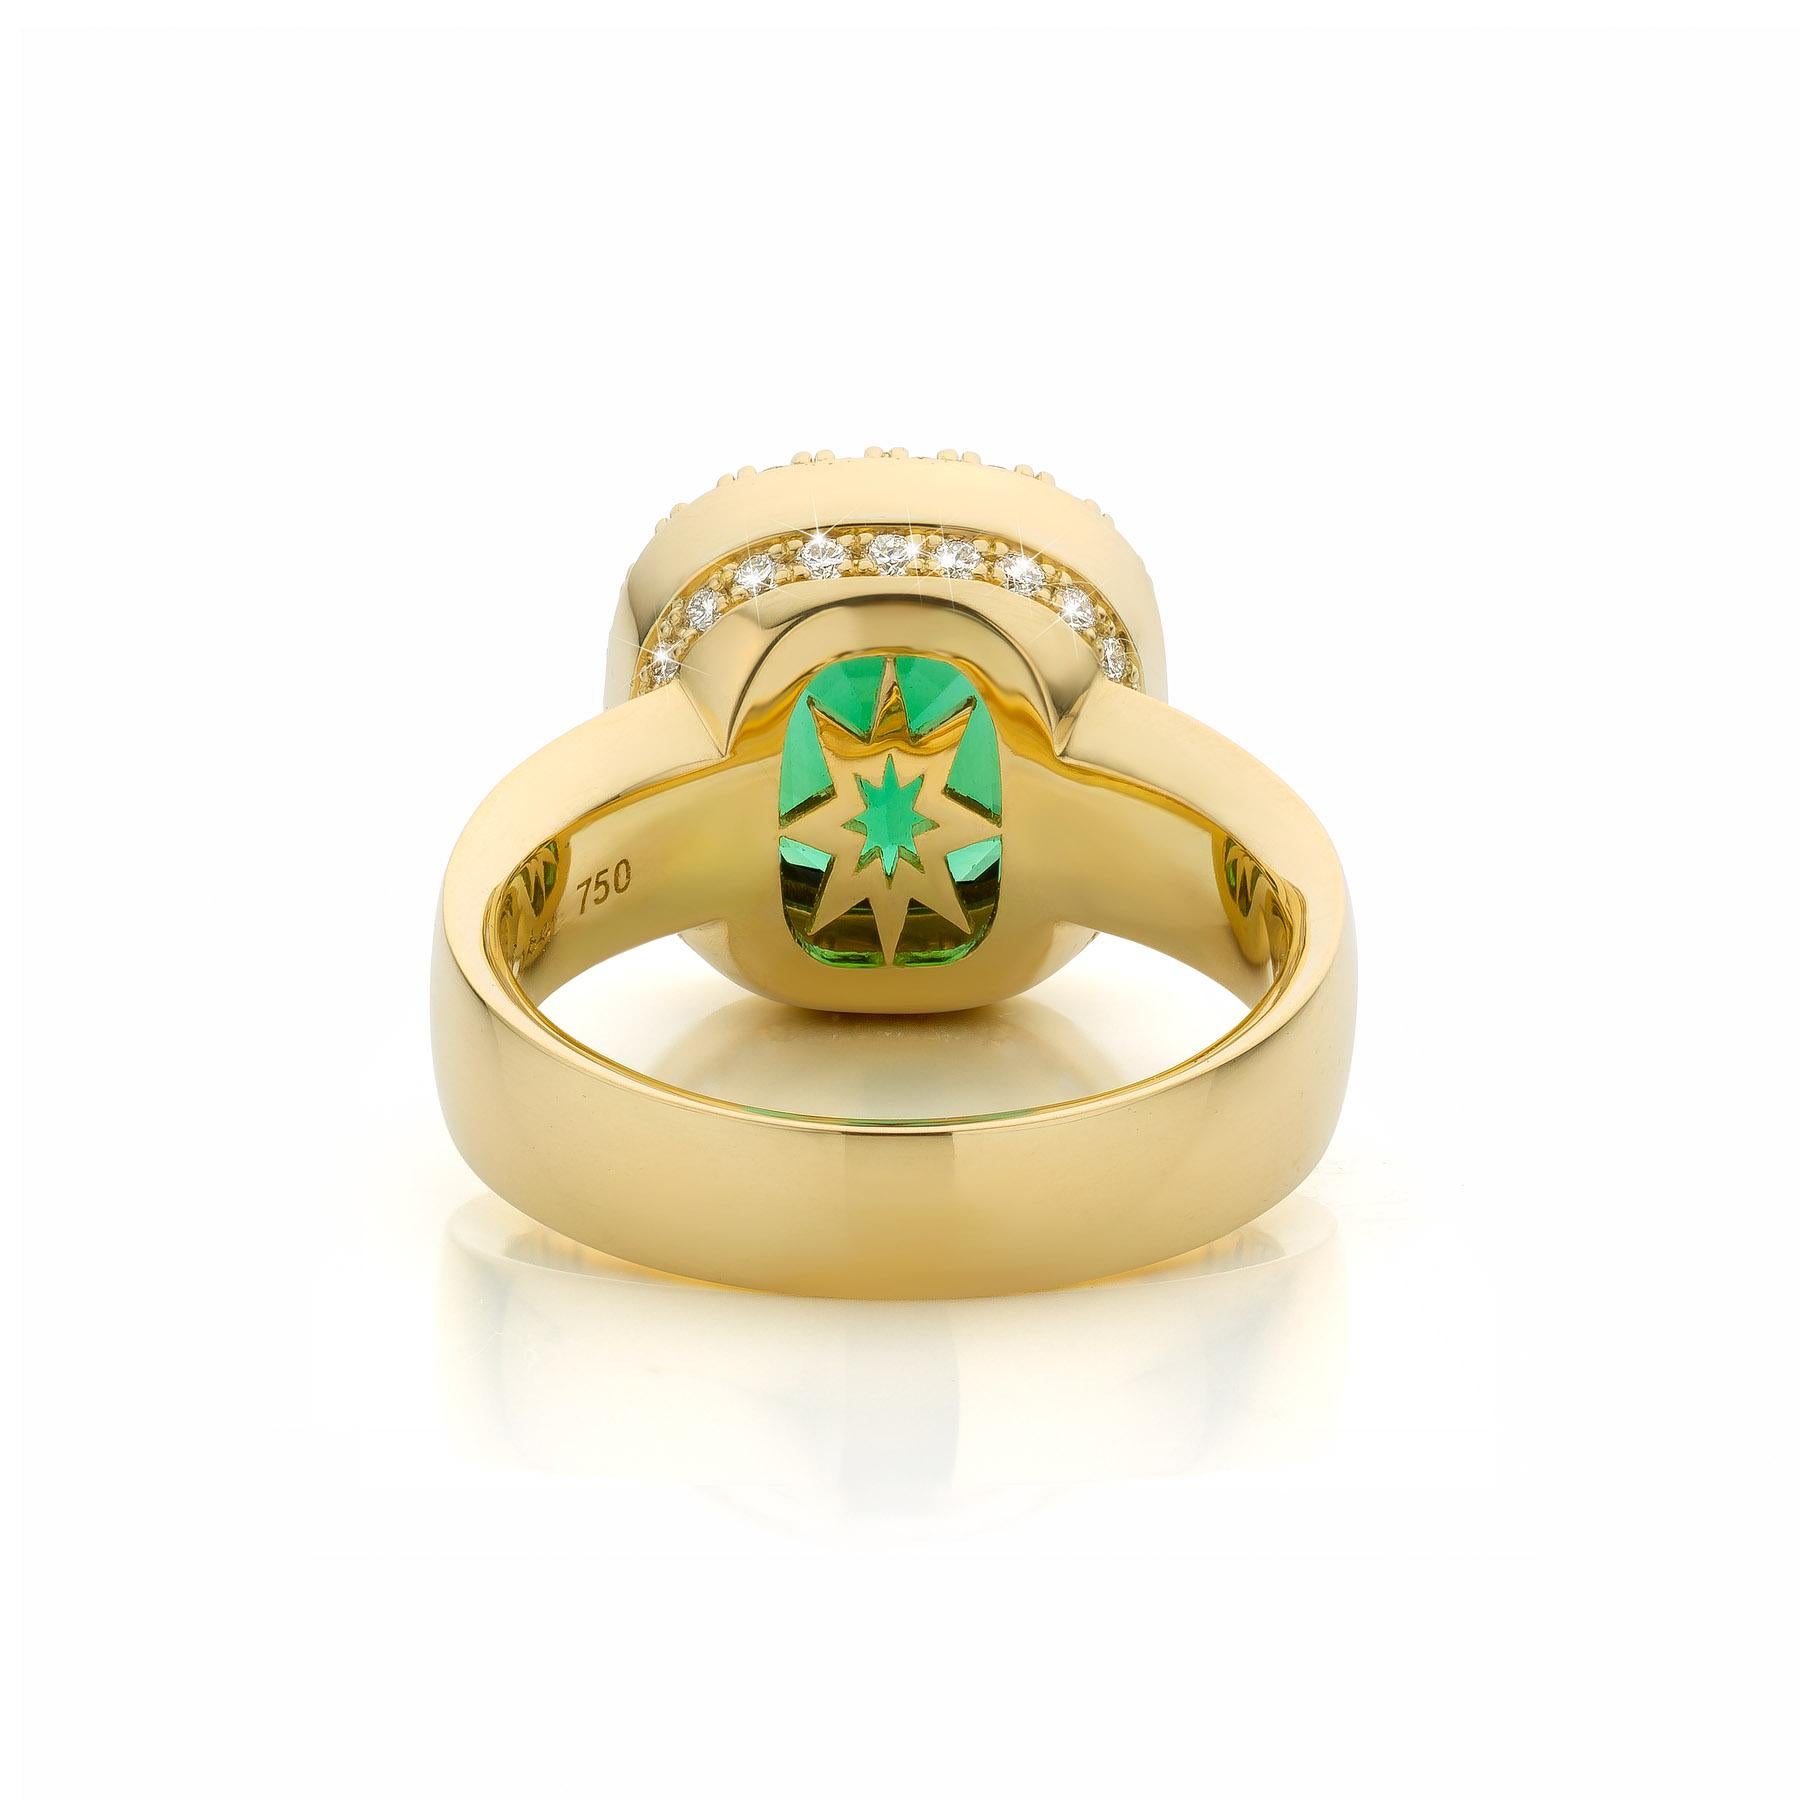 For Sale:  Cober “Dreams of green” grass-green Tourmaline and Brilliant cut Diamonds Ring 3